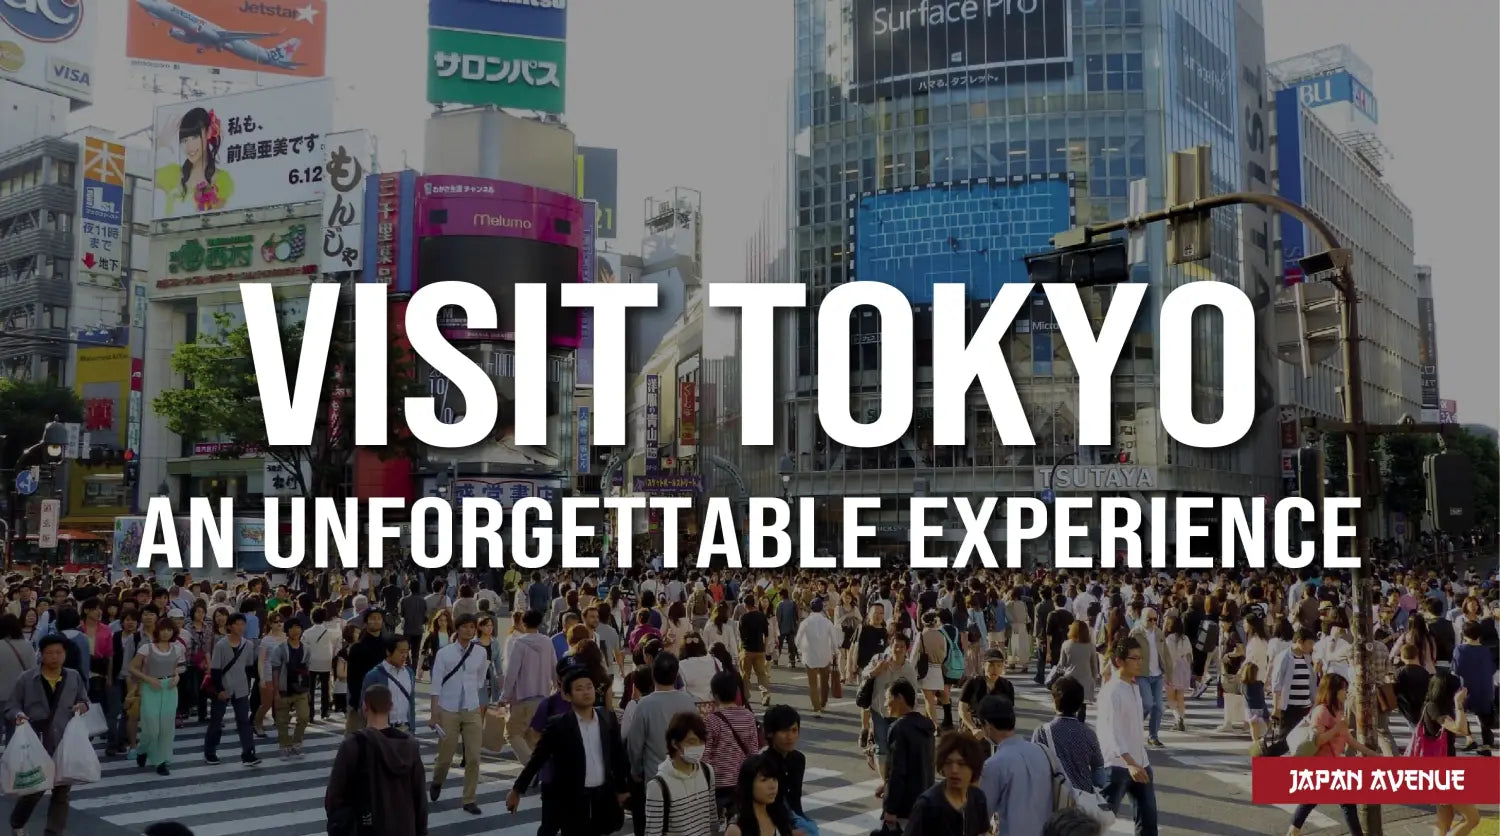 Things to do in Tokyo